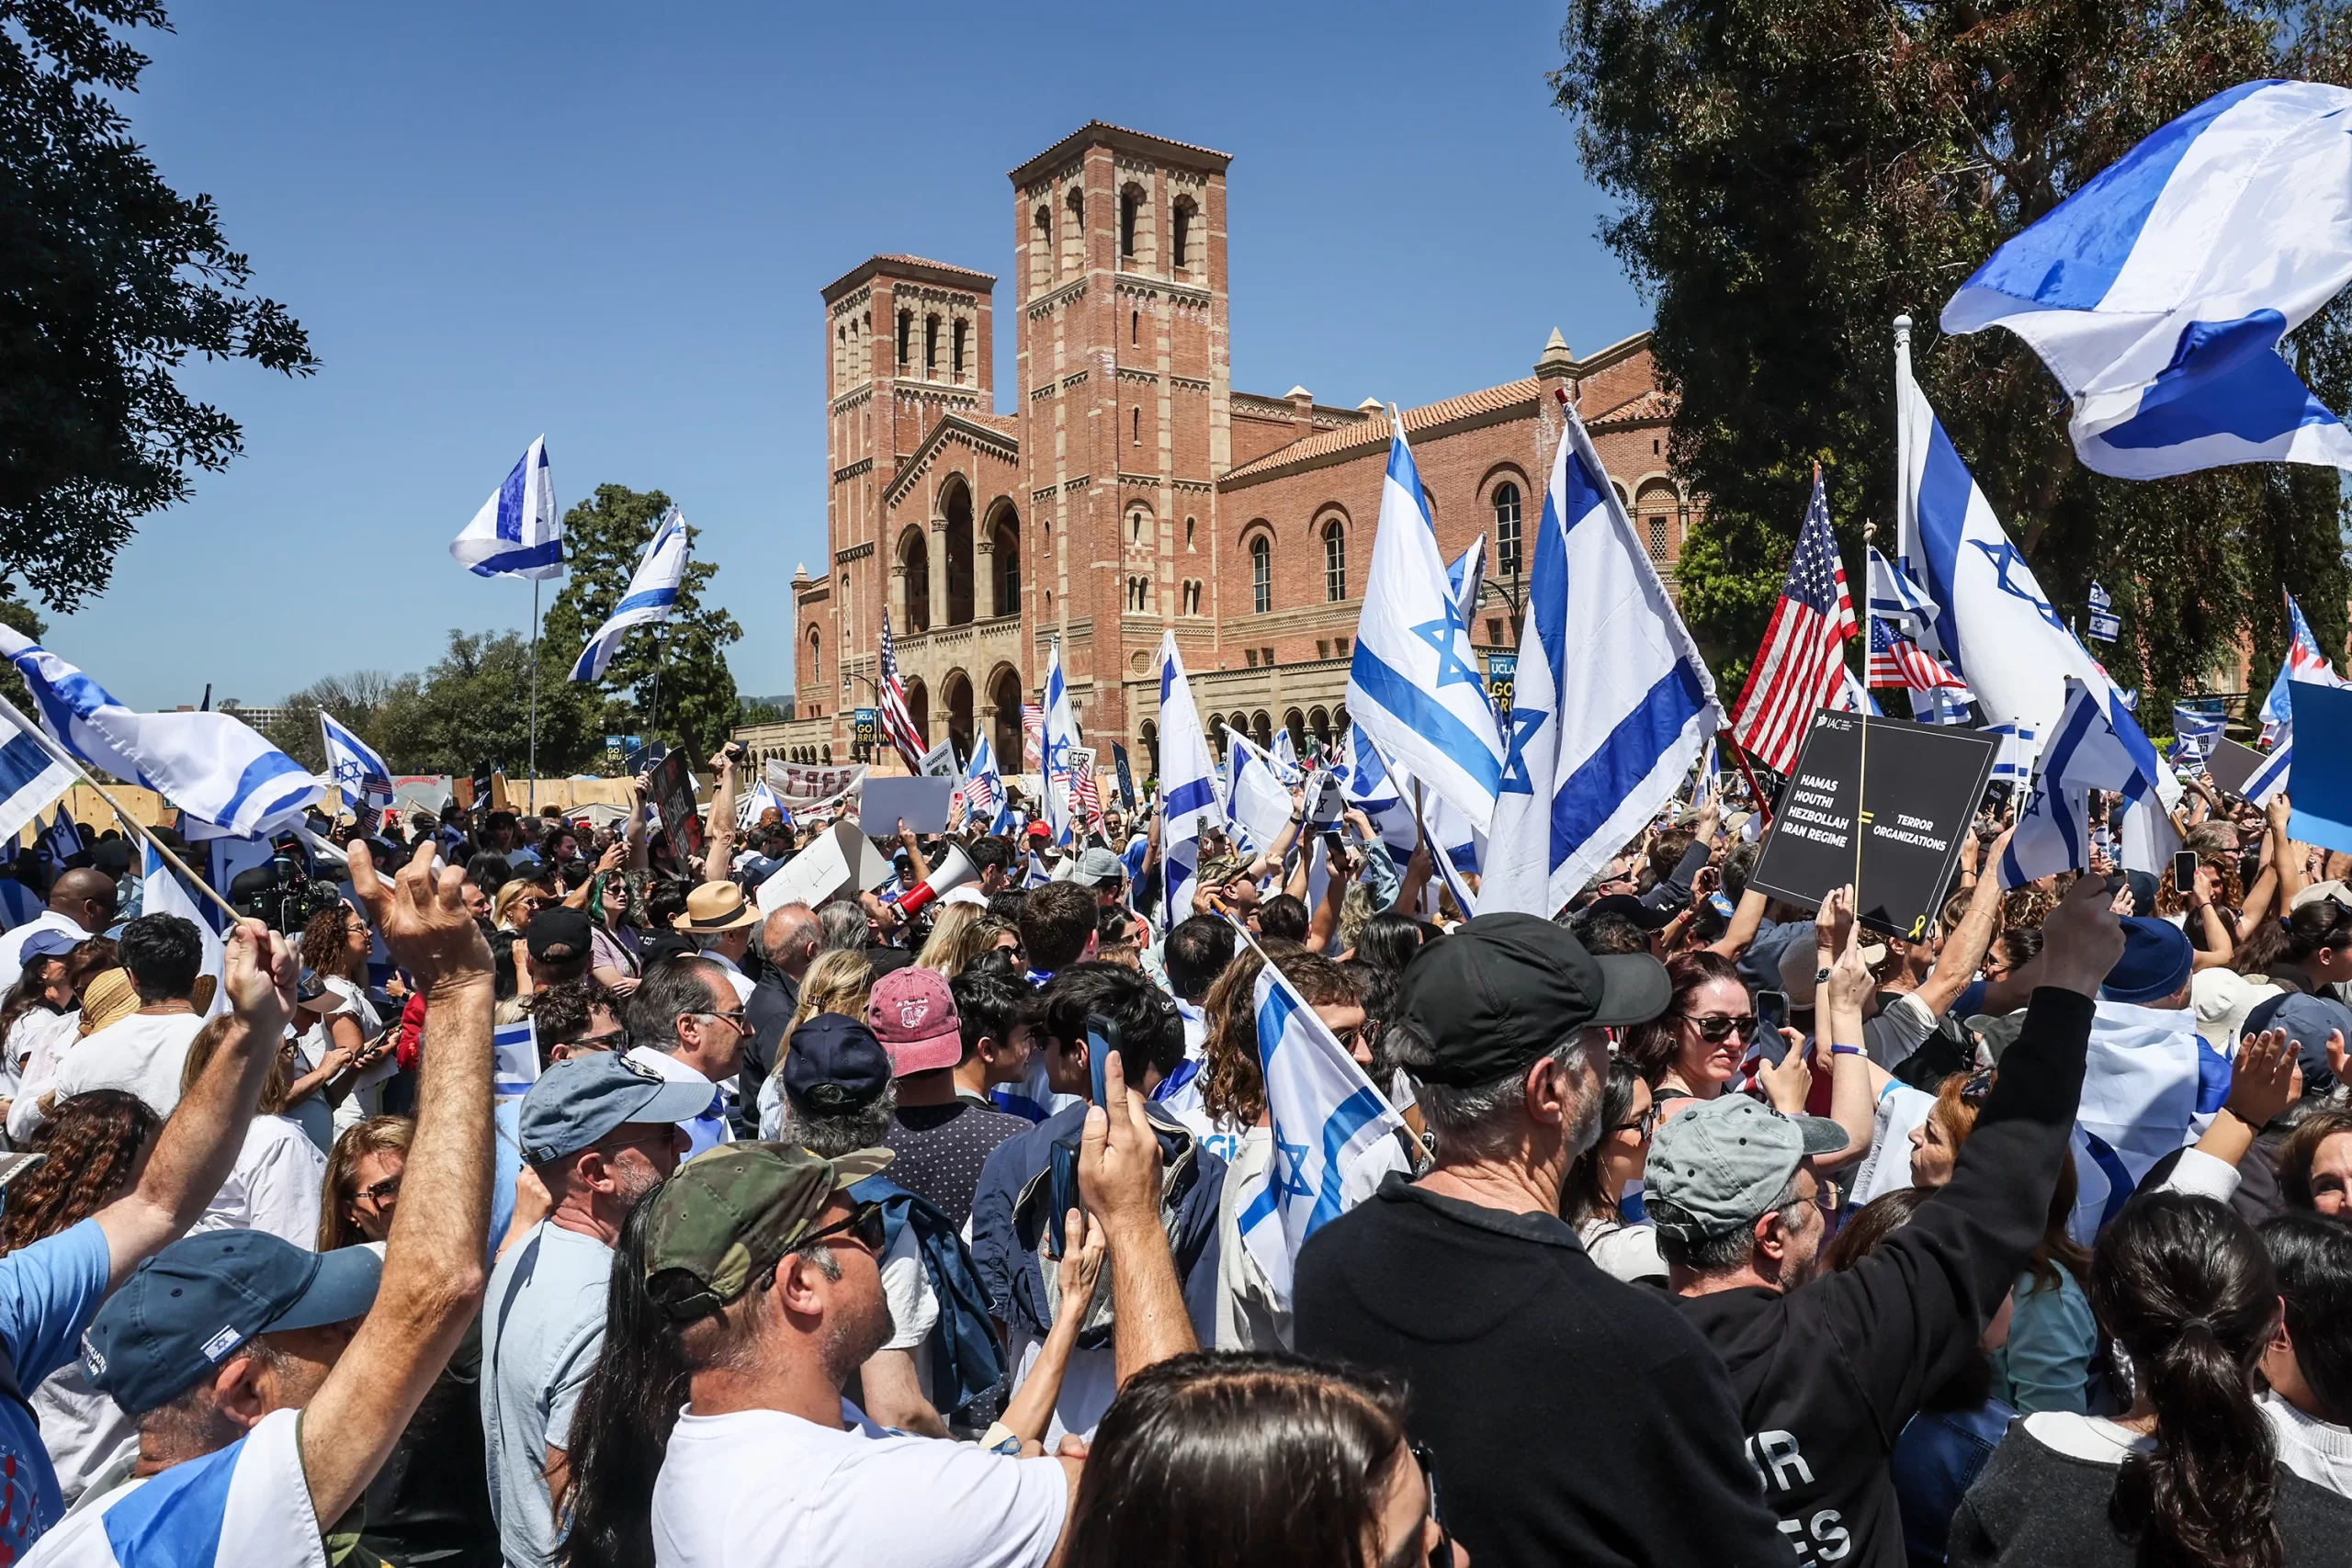 Clashes Erupt Between Pro-Israel and Pro-Palestine Groups at UCLA